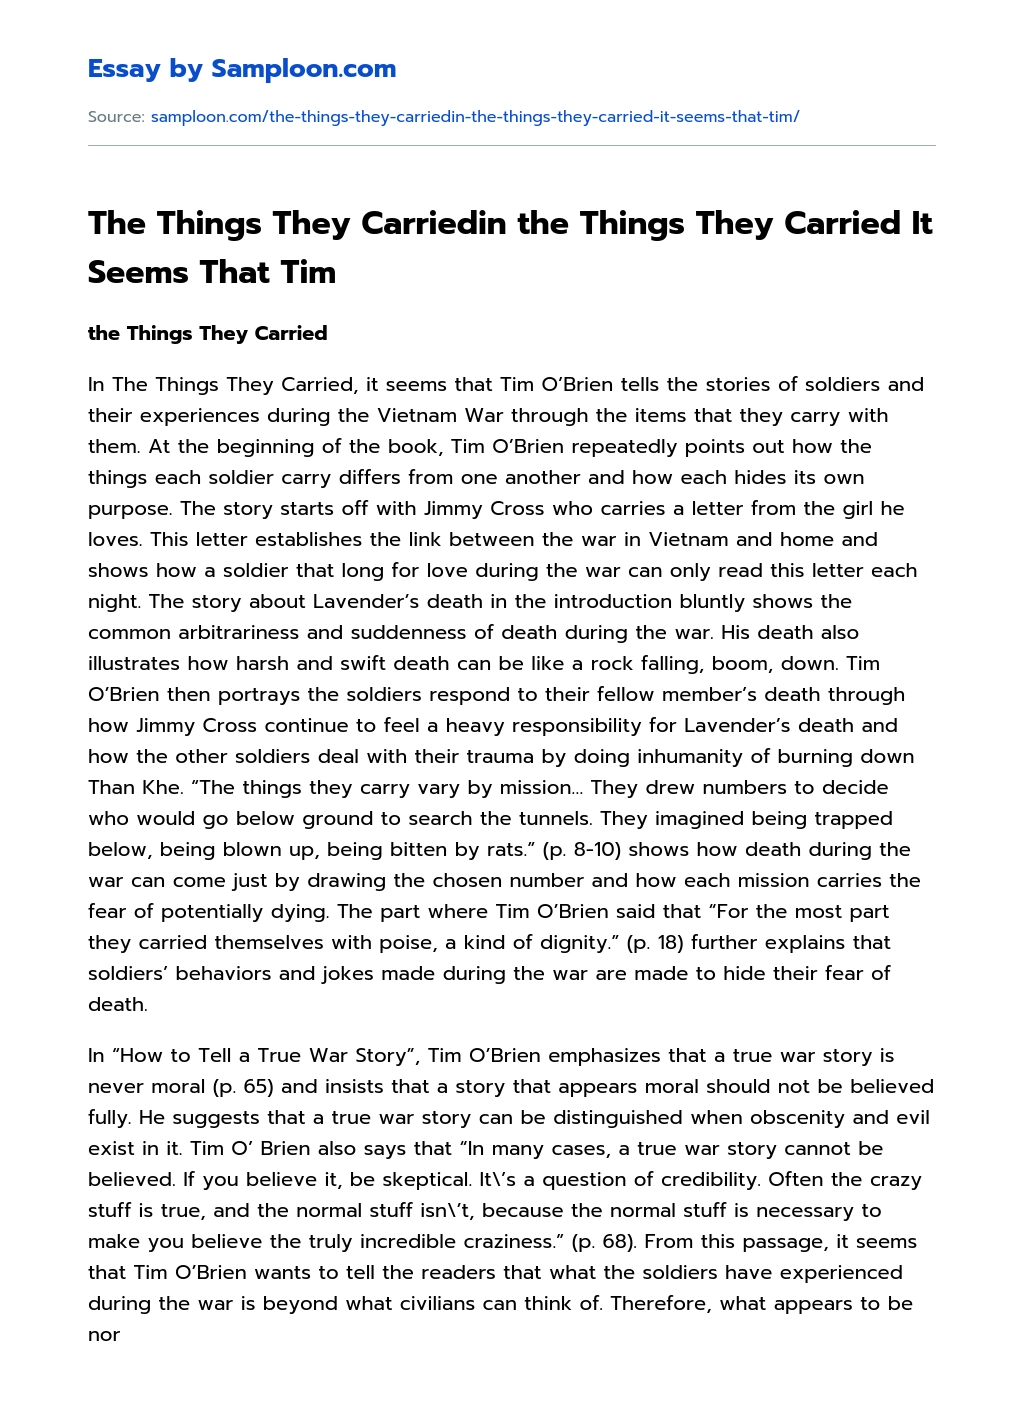 The Things They Carriedin the Things They Carried It Seems That Tim essay